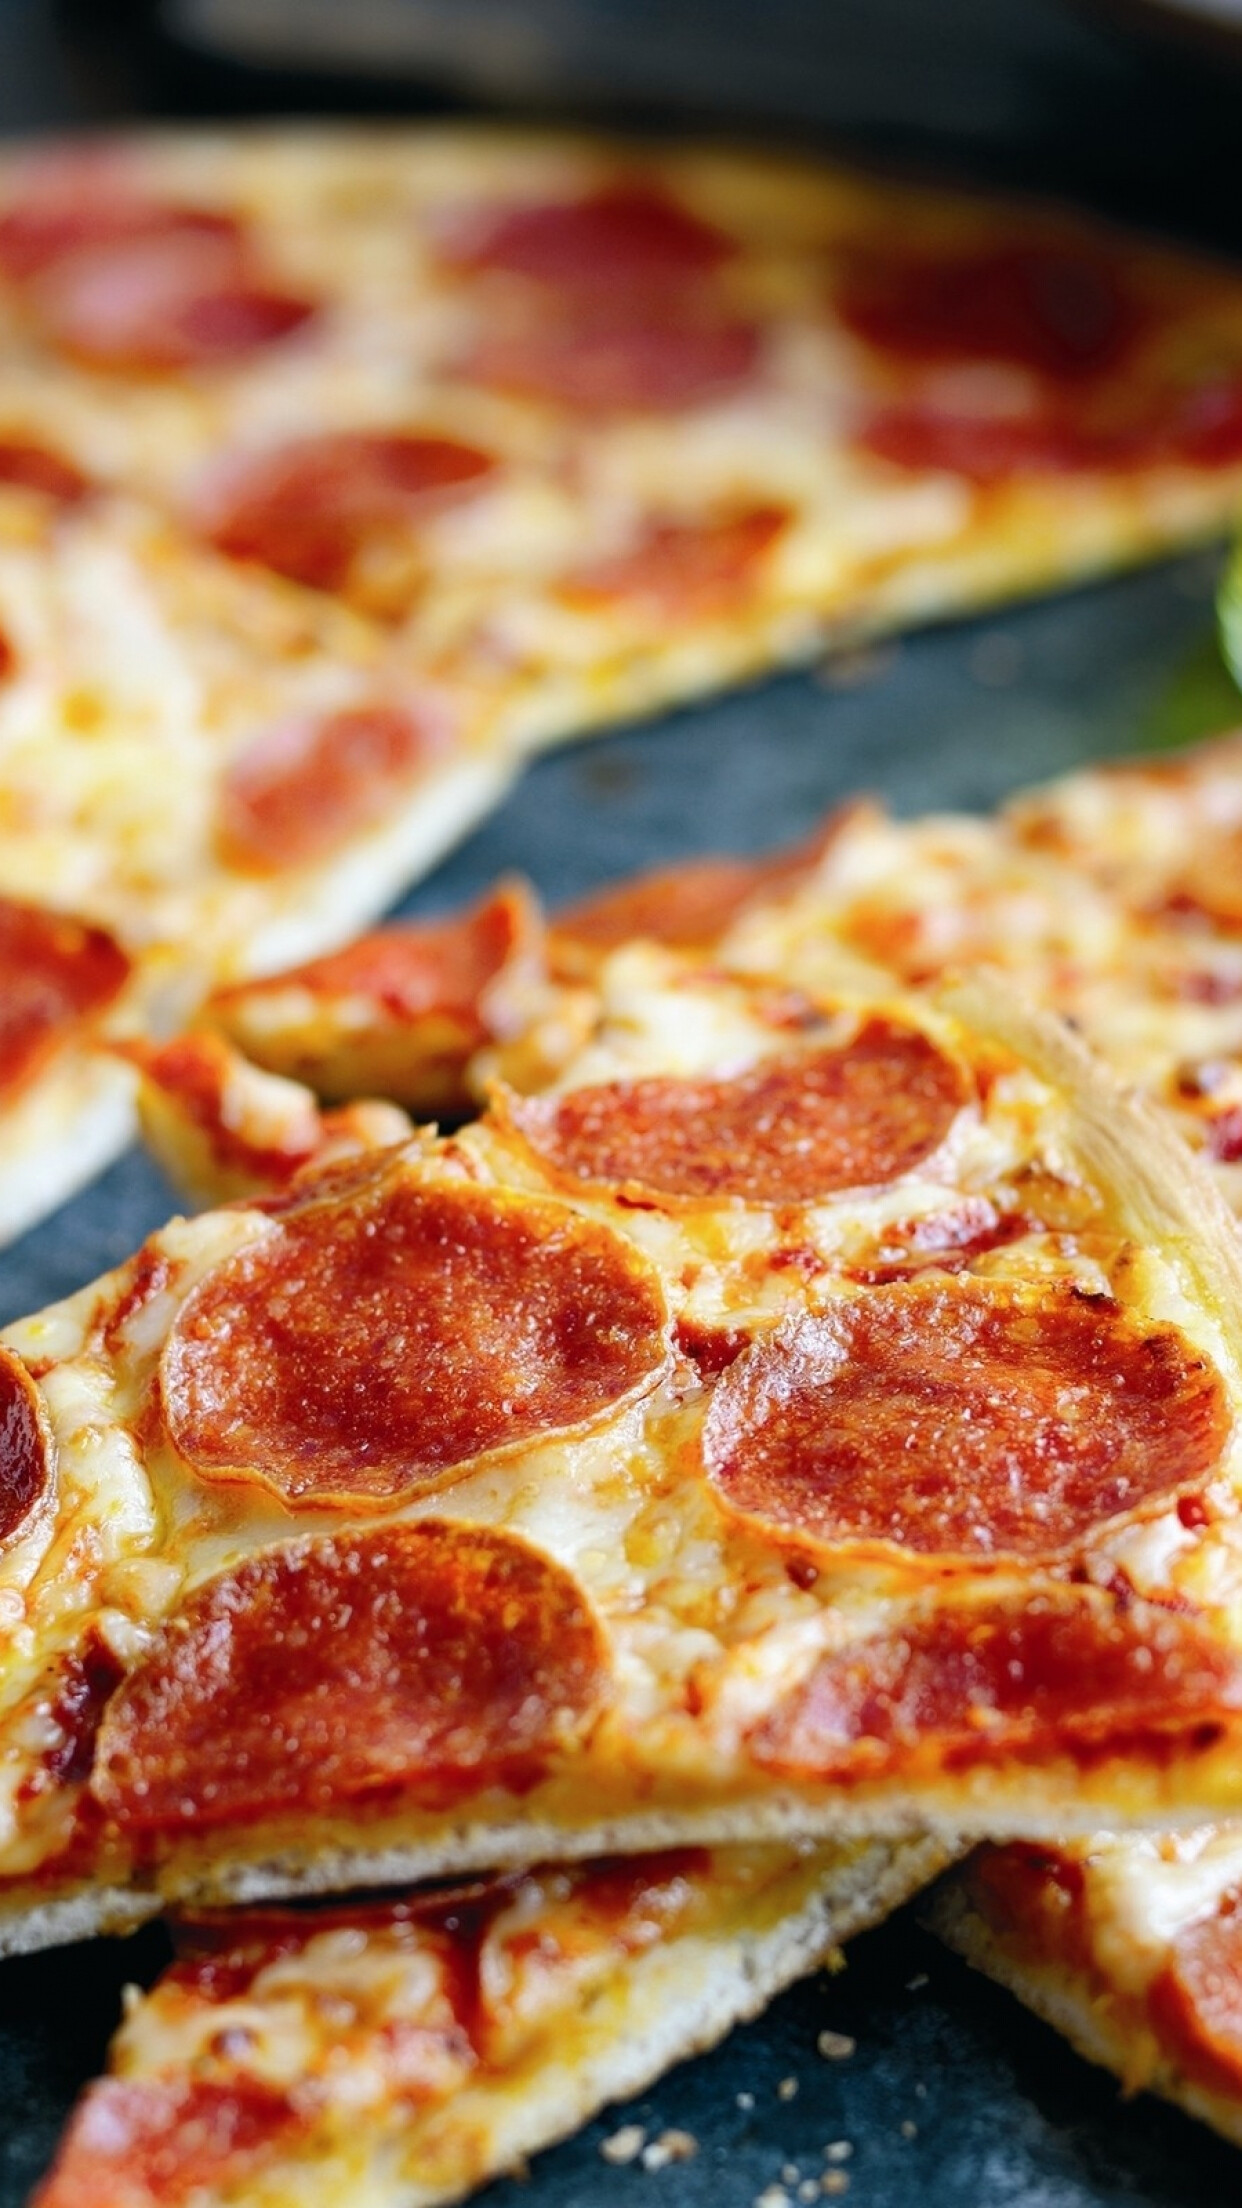 Pizza: Food, A round, baked crust topped with melted cheese and tomato sauce. 1250x2210 HD Wallpaper.